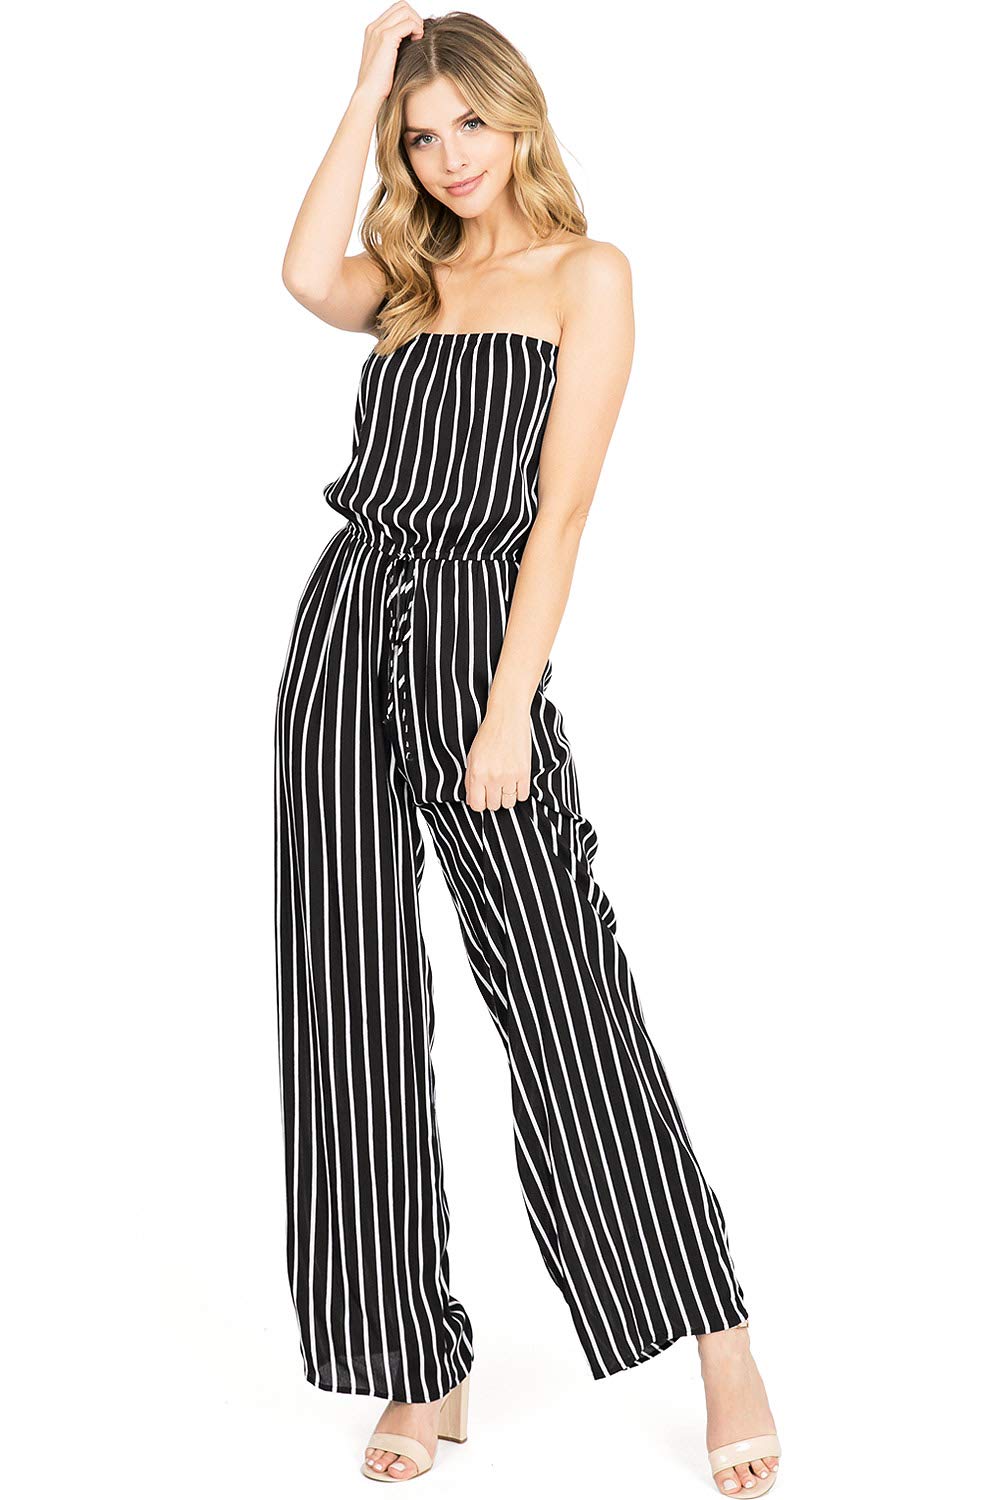 Smooth Sailing Jumpsuit